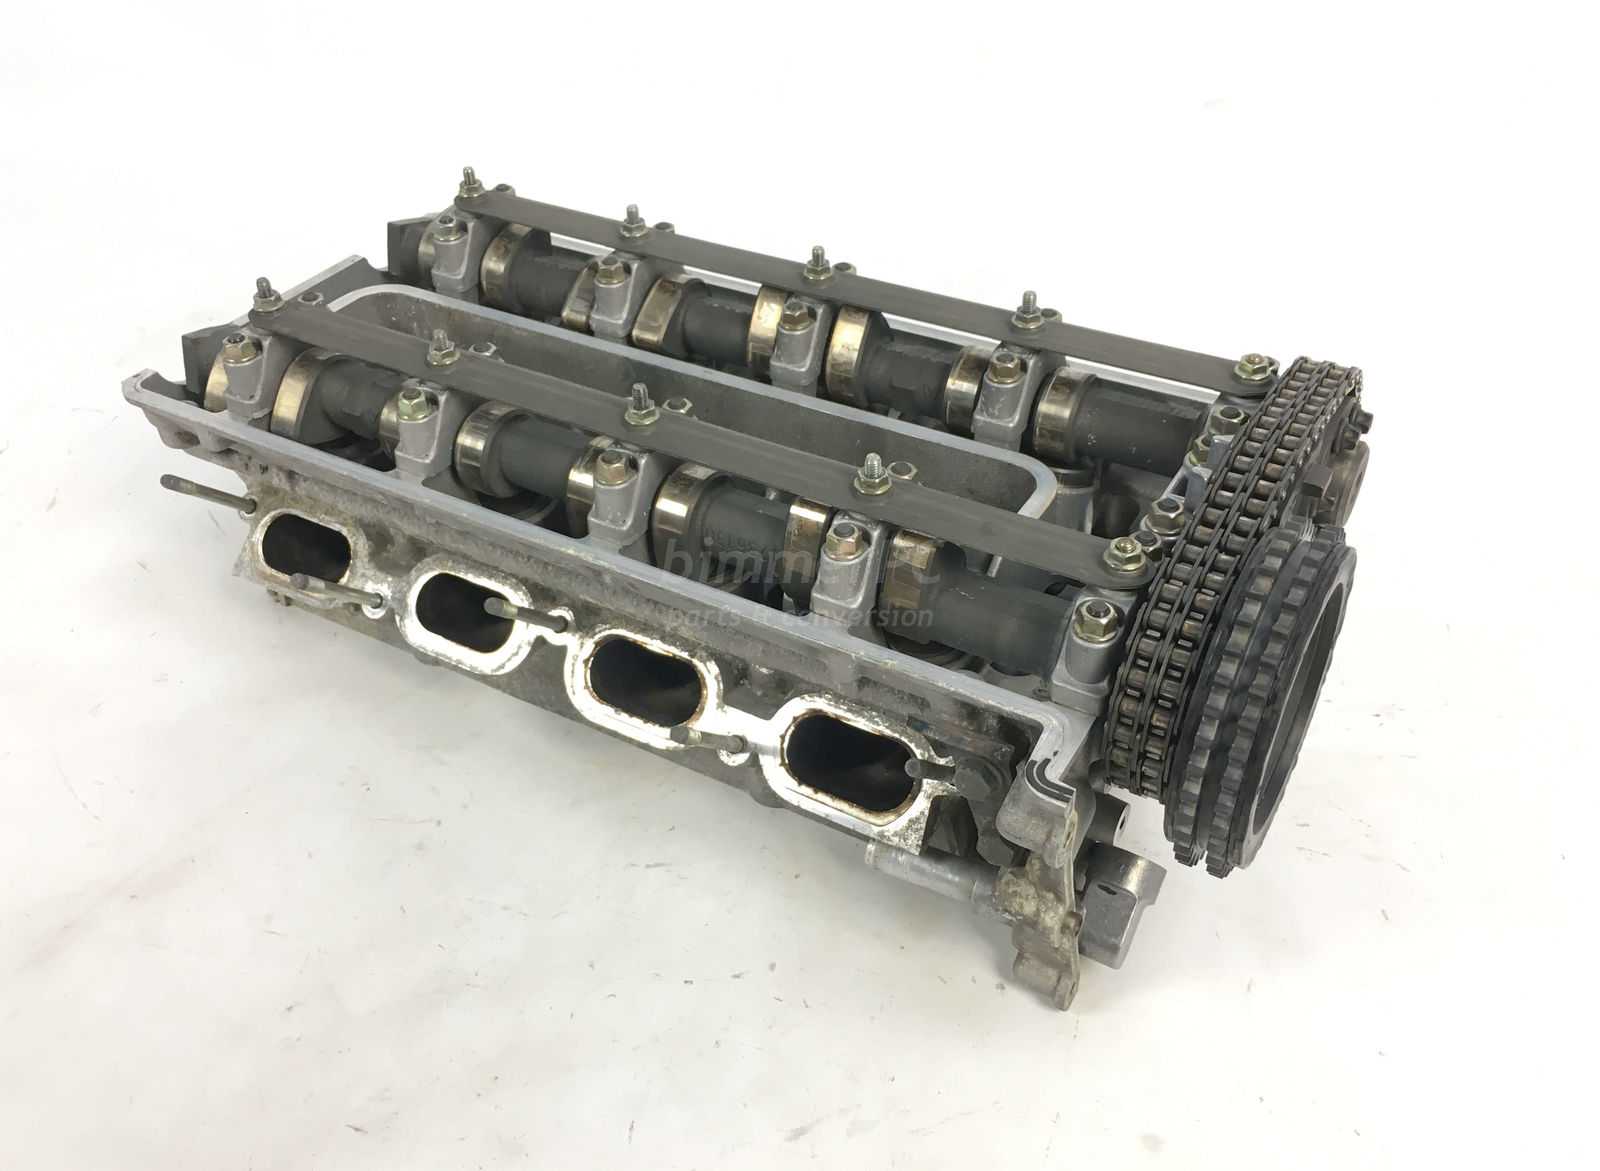 Picture of BMW 11121702685 Left Cylinder Head Bank 2 Cylinders 5-8 M60 B30 3.0L V8 E34 530i Late for sale